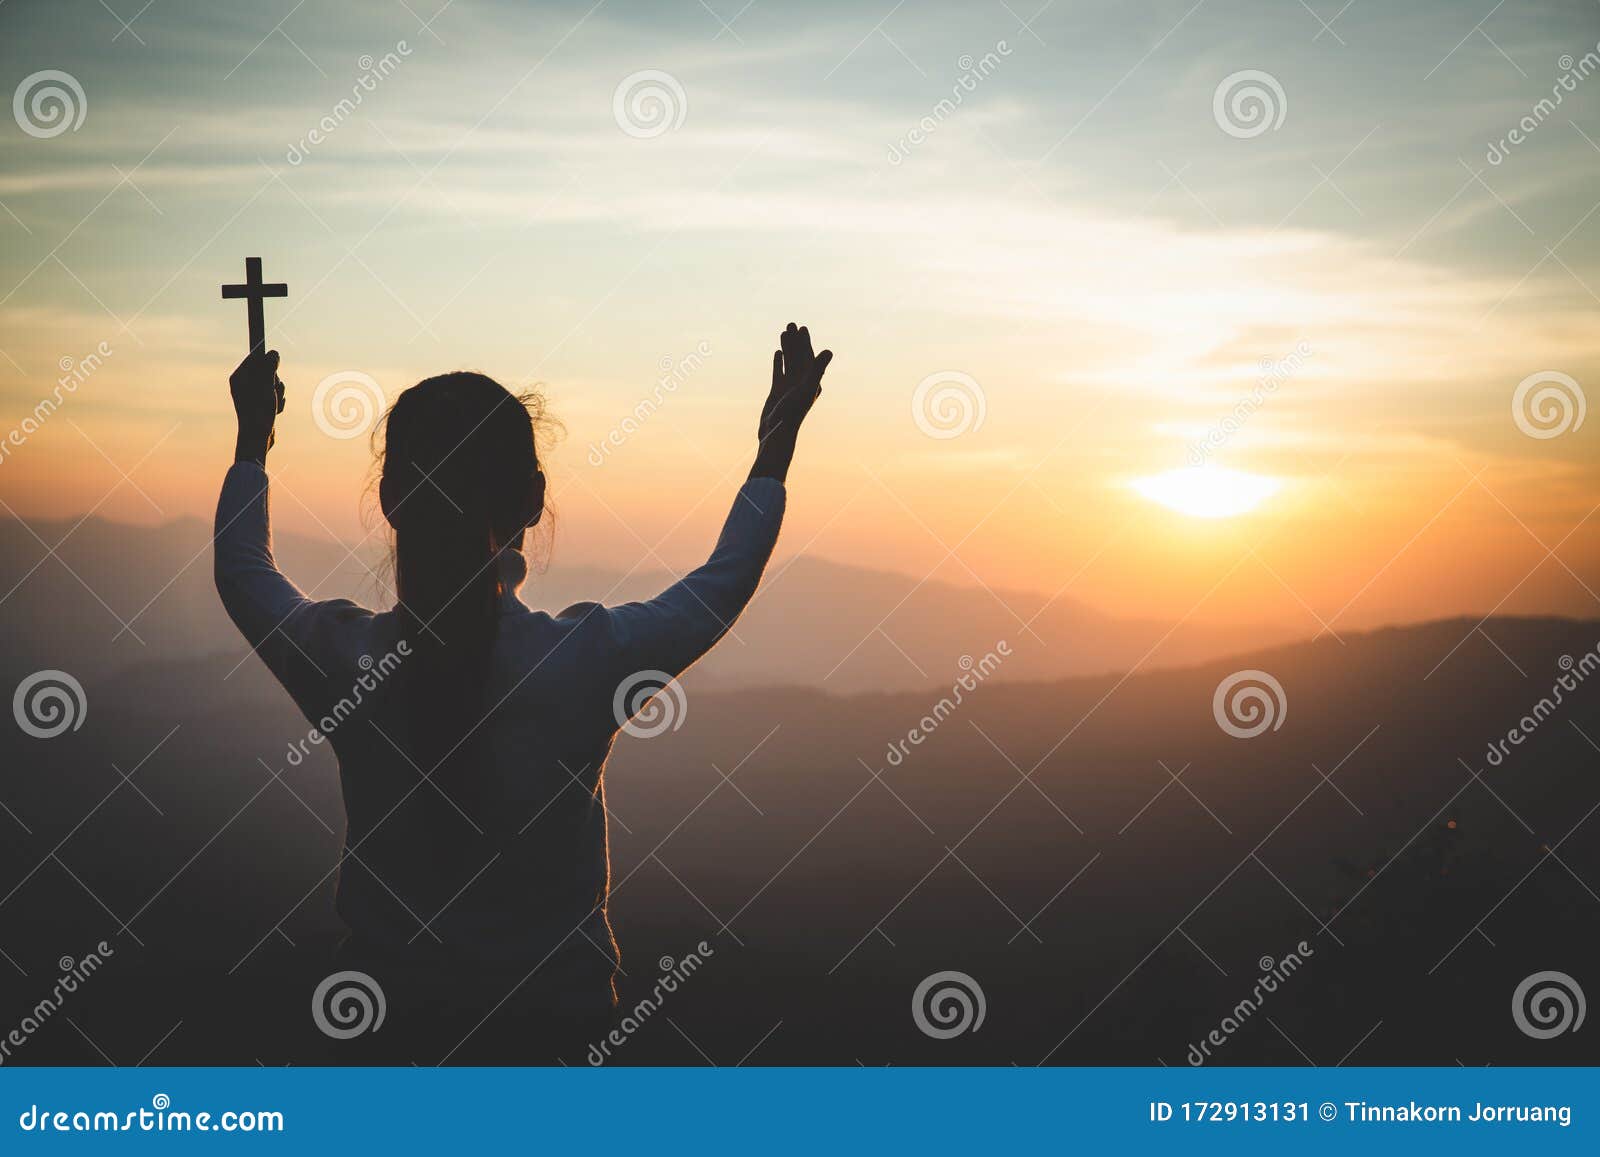 a women is praying to god on the mountain. praying hands with faith in religion and belief in god on blessing background. power of